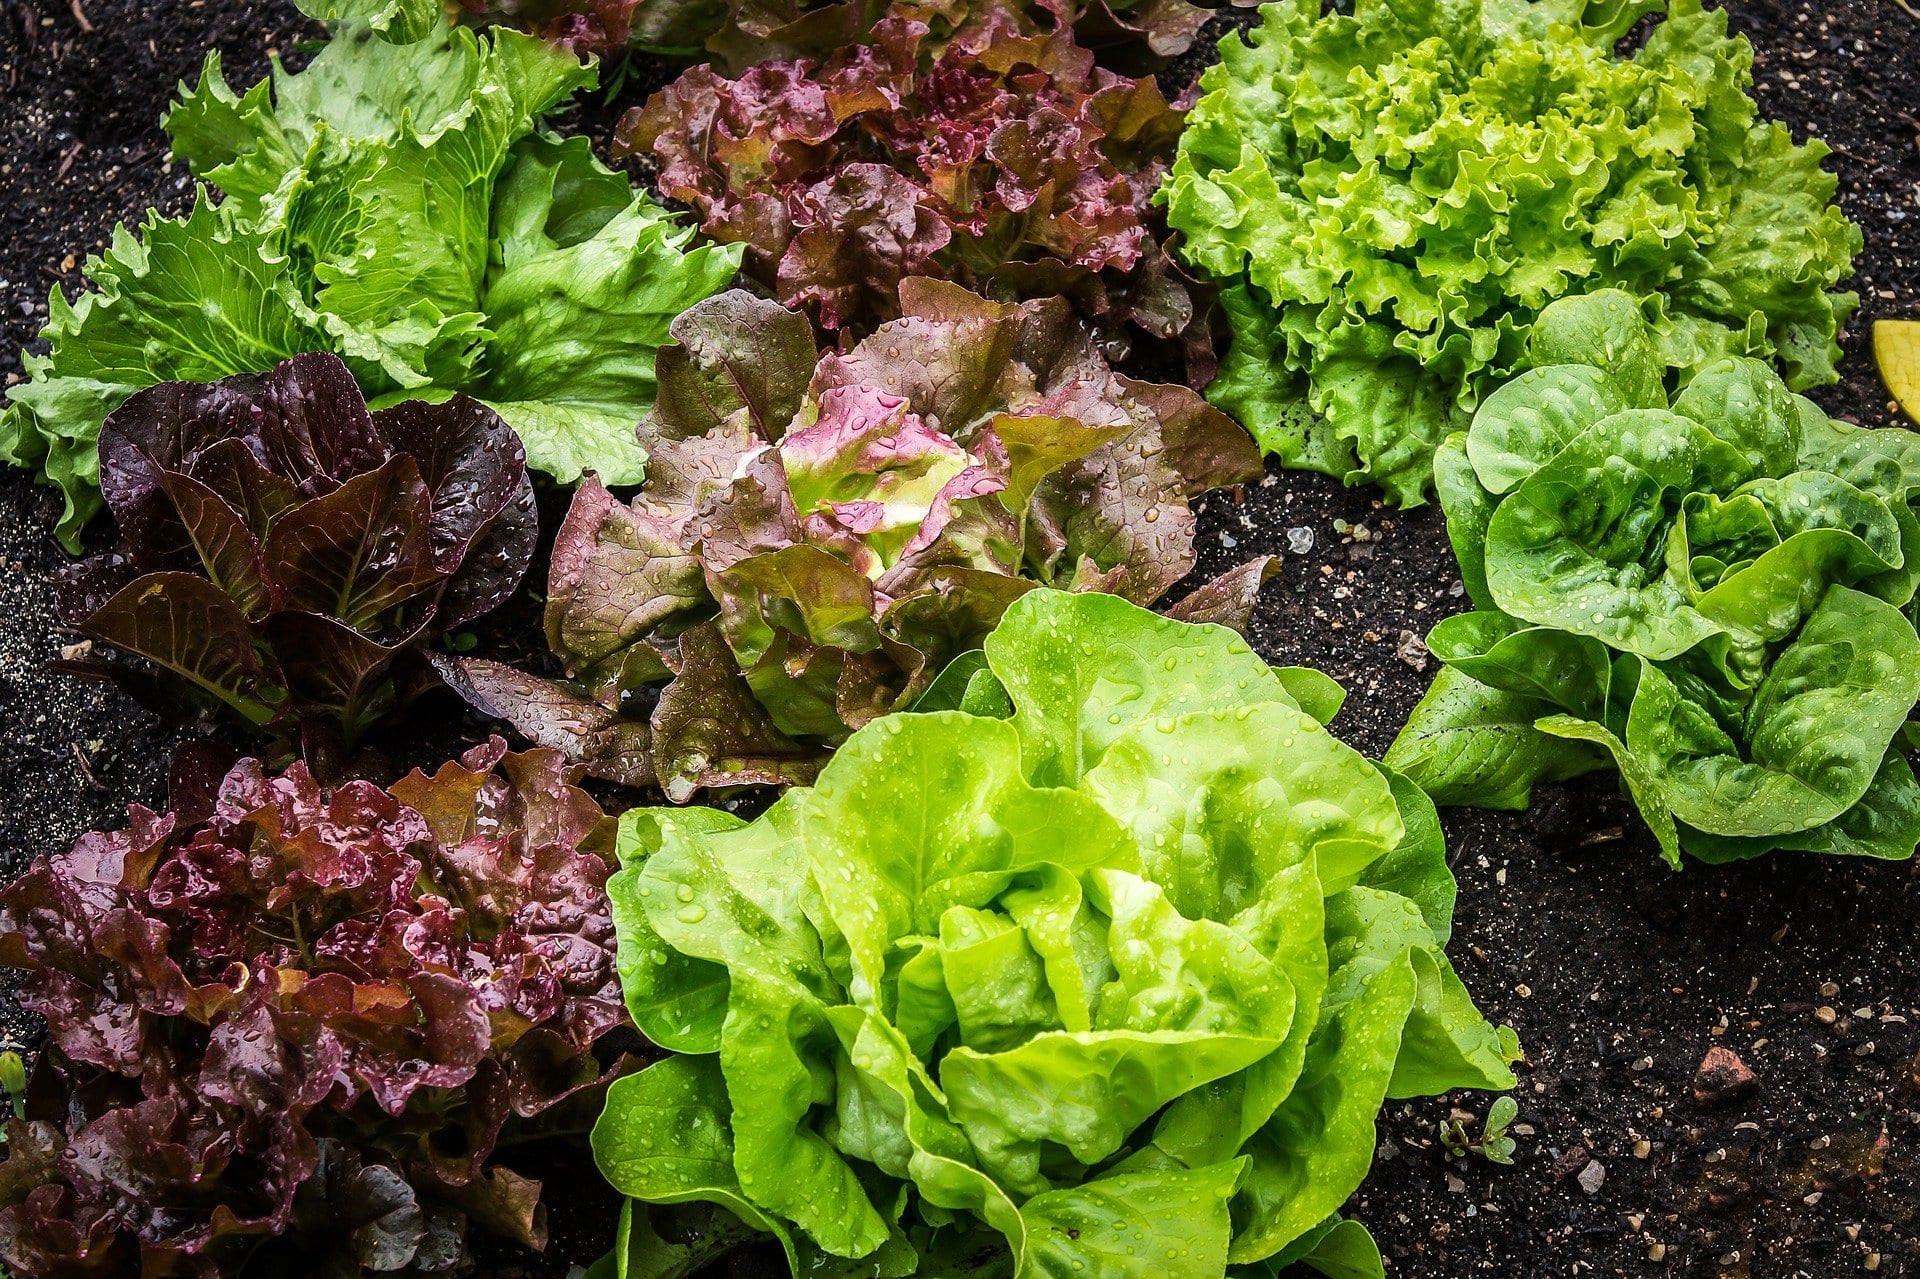 Cultivate your lettuce in containers or window box